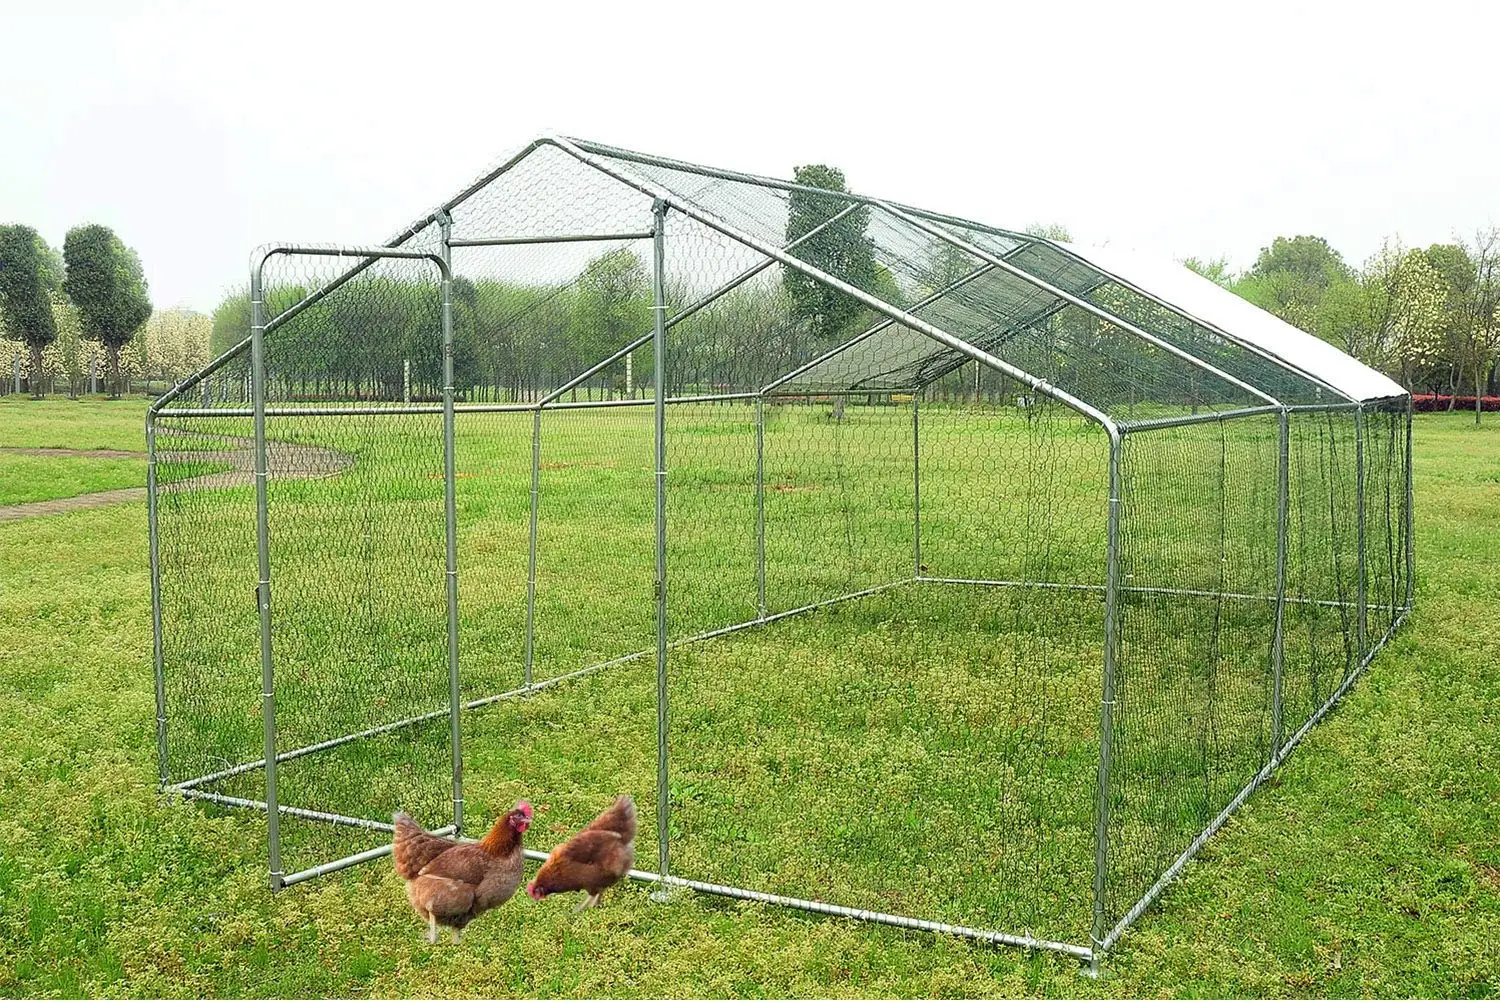 9.2' L x 12.5' W x 6.4' H Large Metal Chicken Coop Outdoor Duck House Walk-in Poultry Cage Chicken Pen Rabbits Cage Flat Roofed Coop with Waterproof and Anti-Ultraviolet Cover for Backyard Farm Use 